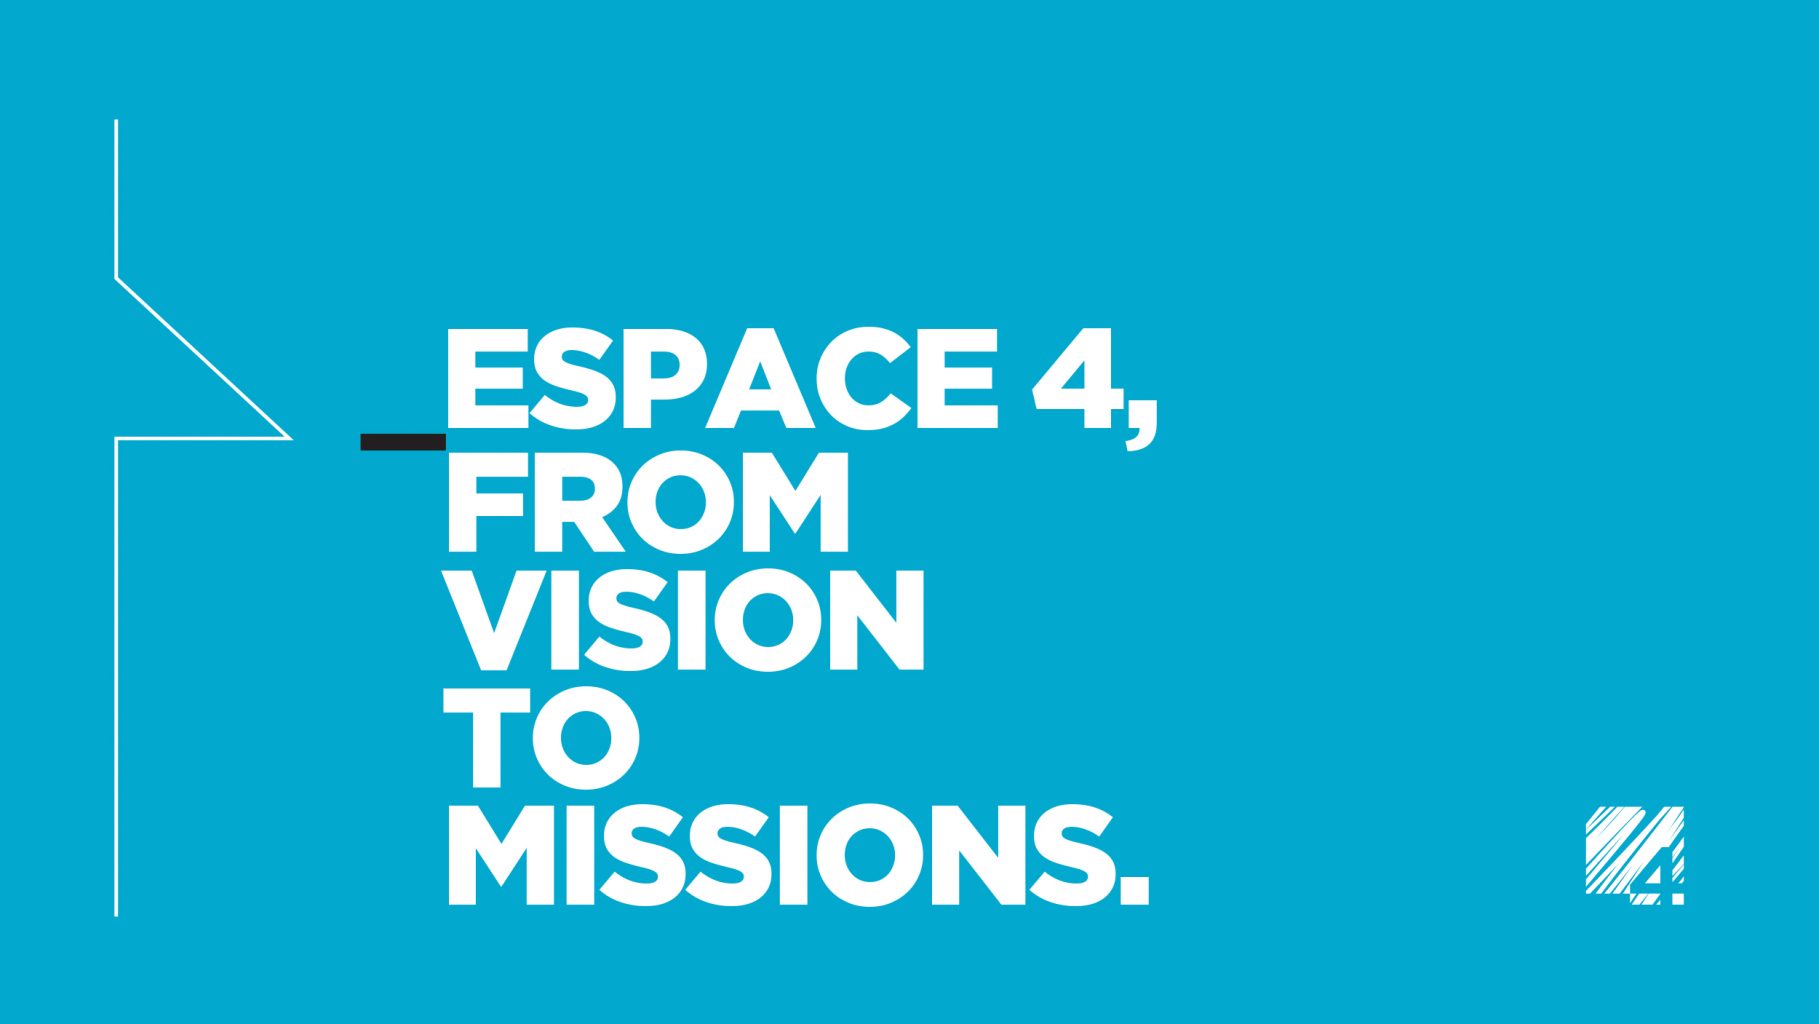 Baseline : "from vision to missions"